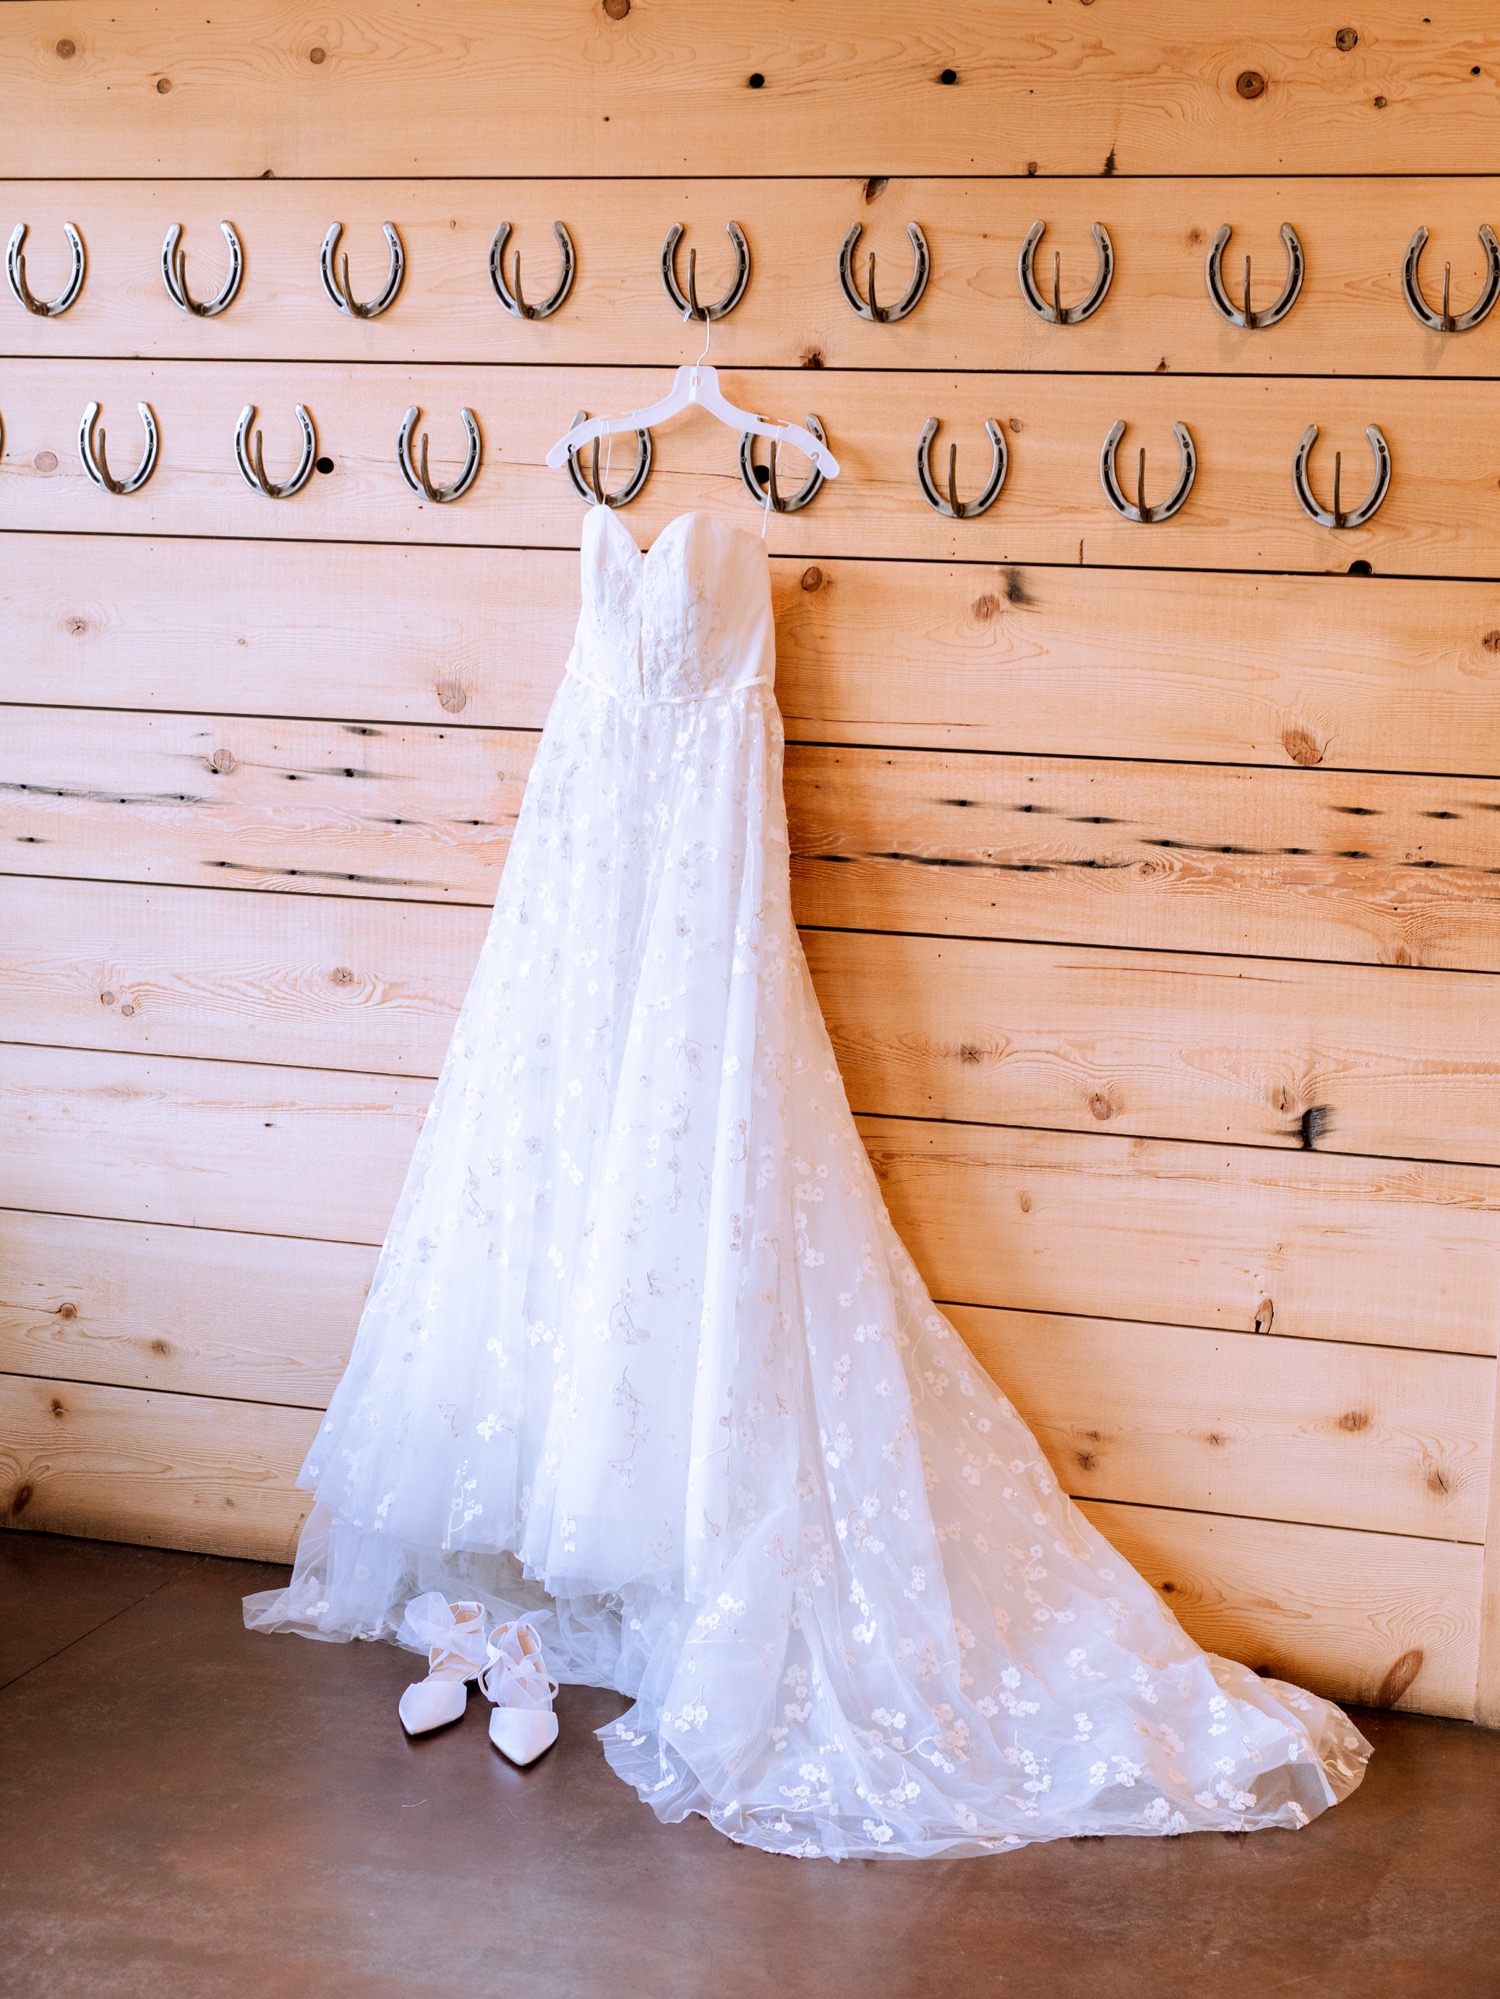 dress hanging on the wall of horseshoes at the king family vineyard in Charlottesville, Virginia